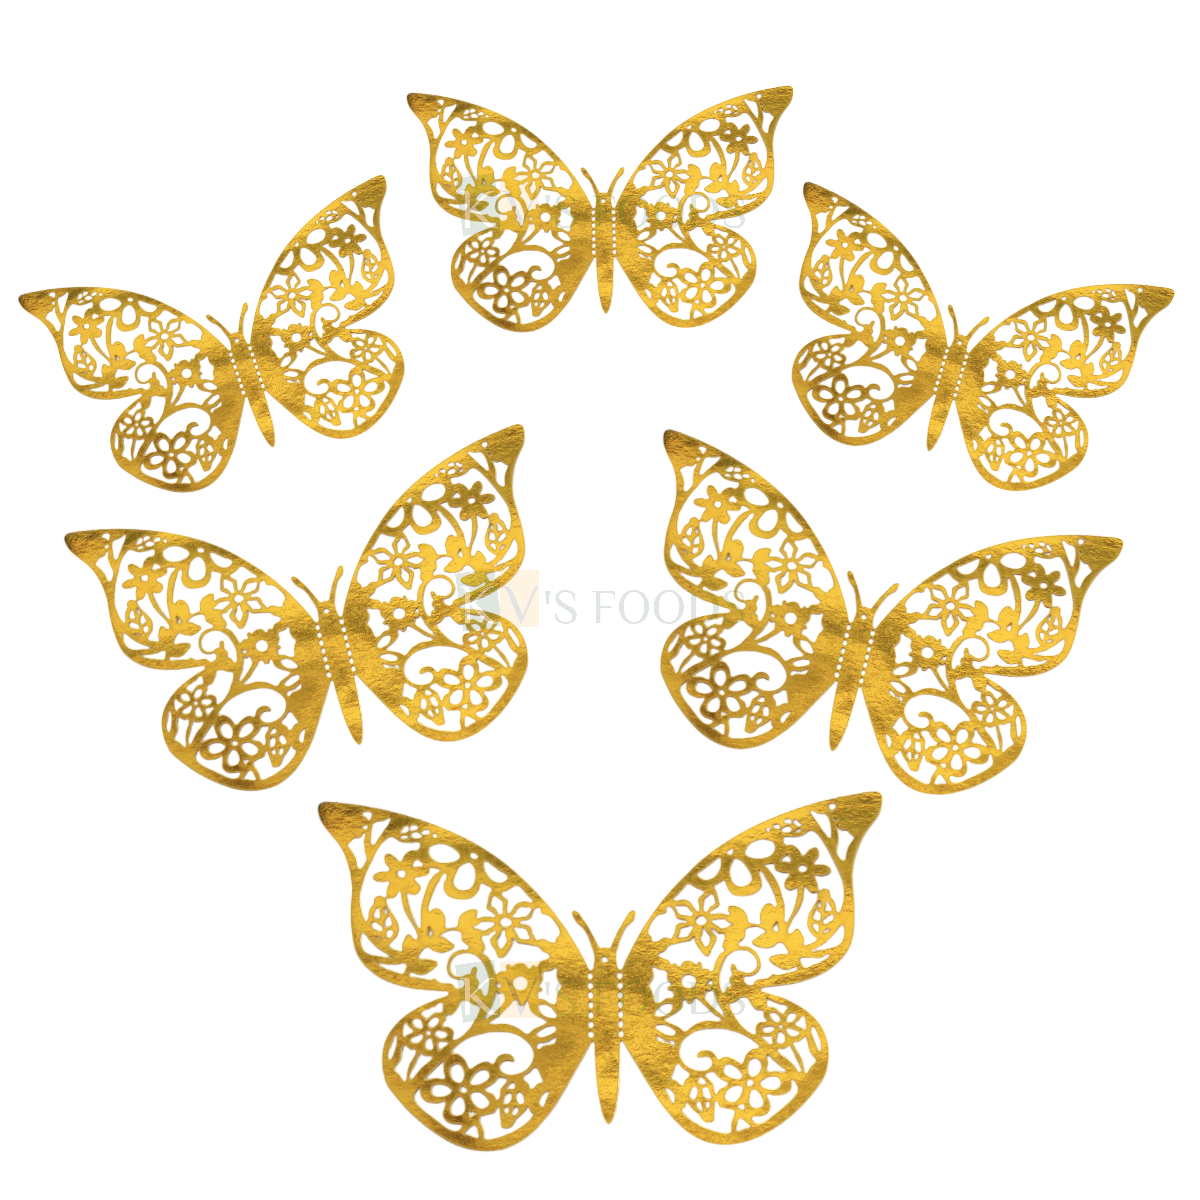 12 PCS Shiny Fancy 3D Golden Colour Different Size Designed Butterfly Cake Topper Vein Hard Paper Foldable Butterfly Cake Toppers, Girls Happy Birthday Theme Anniversary Side Cake Decorations